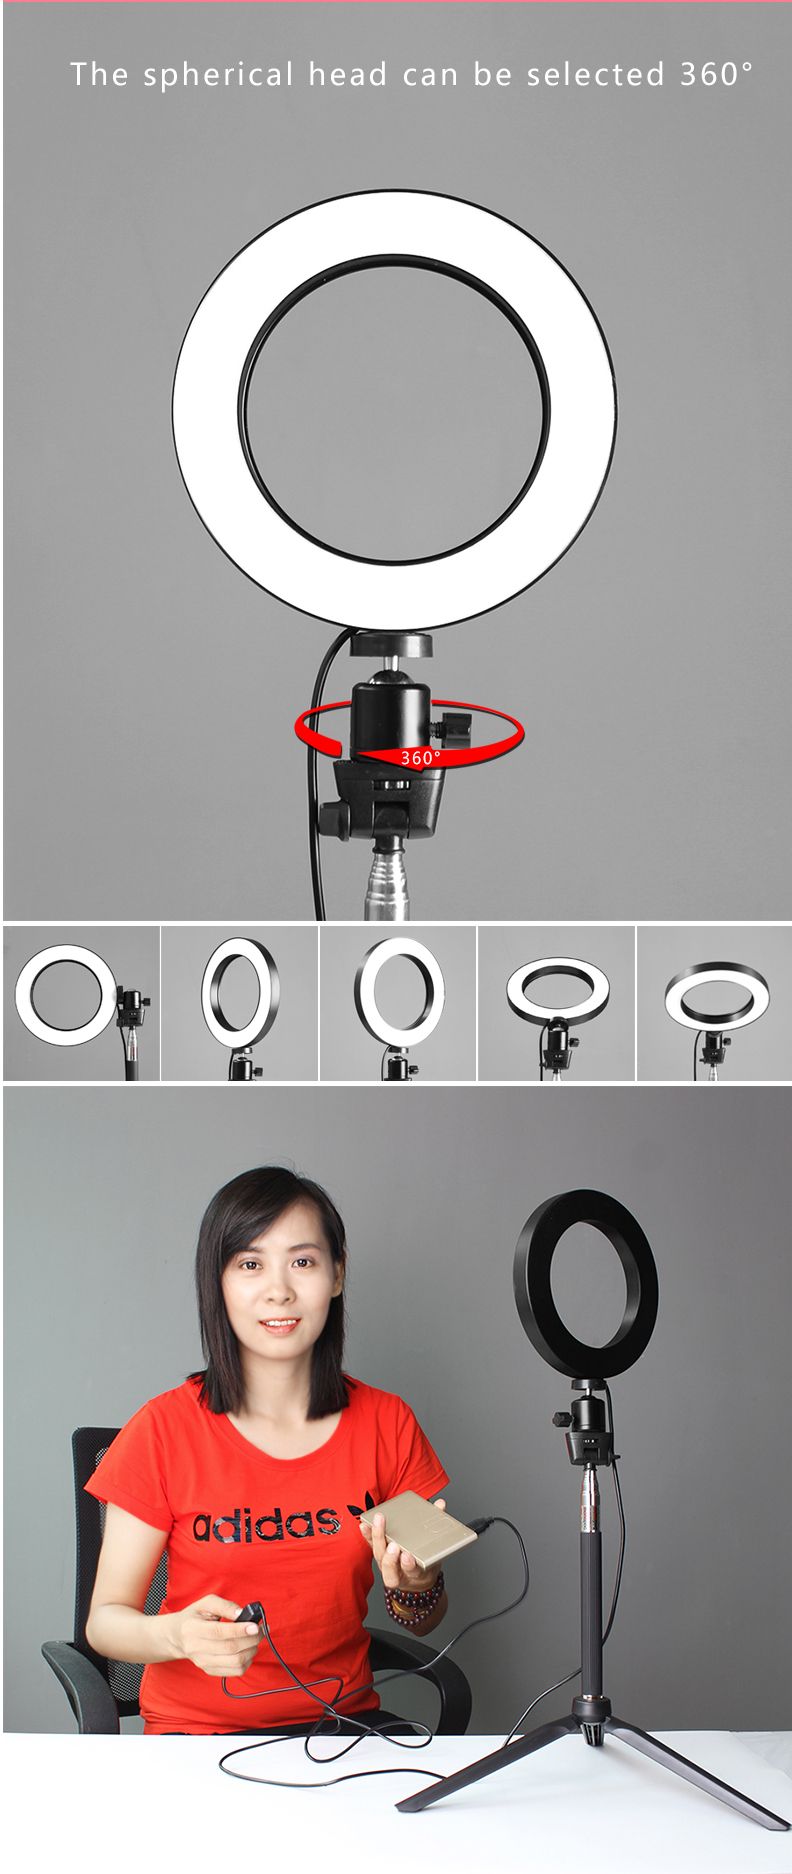 Yingnuost-26CM-3500-5500k-Video-Ring-Light-with-100cm-Extendable-Selfie-Stick-Stand-Tripod-Phone-Cli-1567915